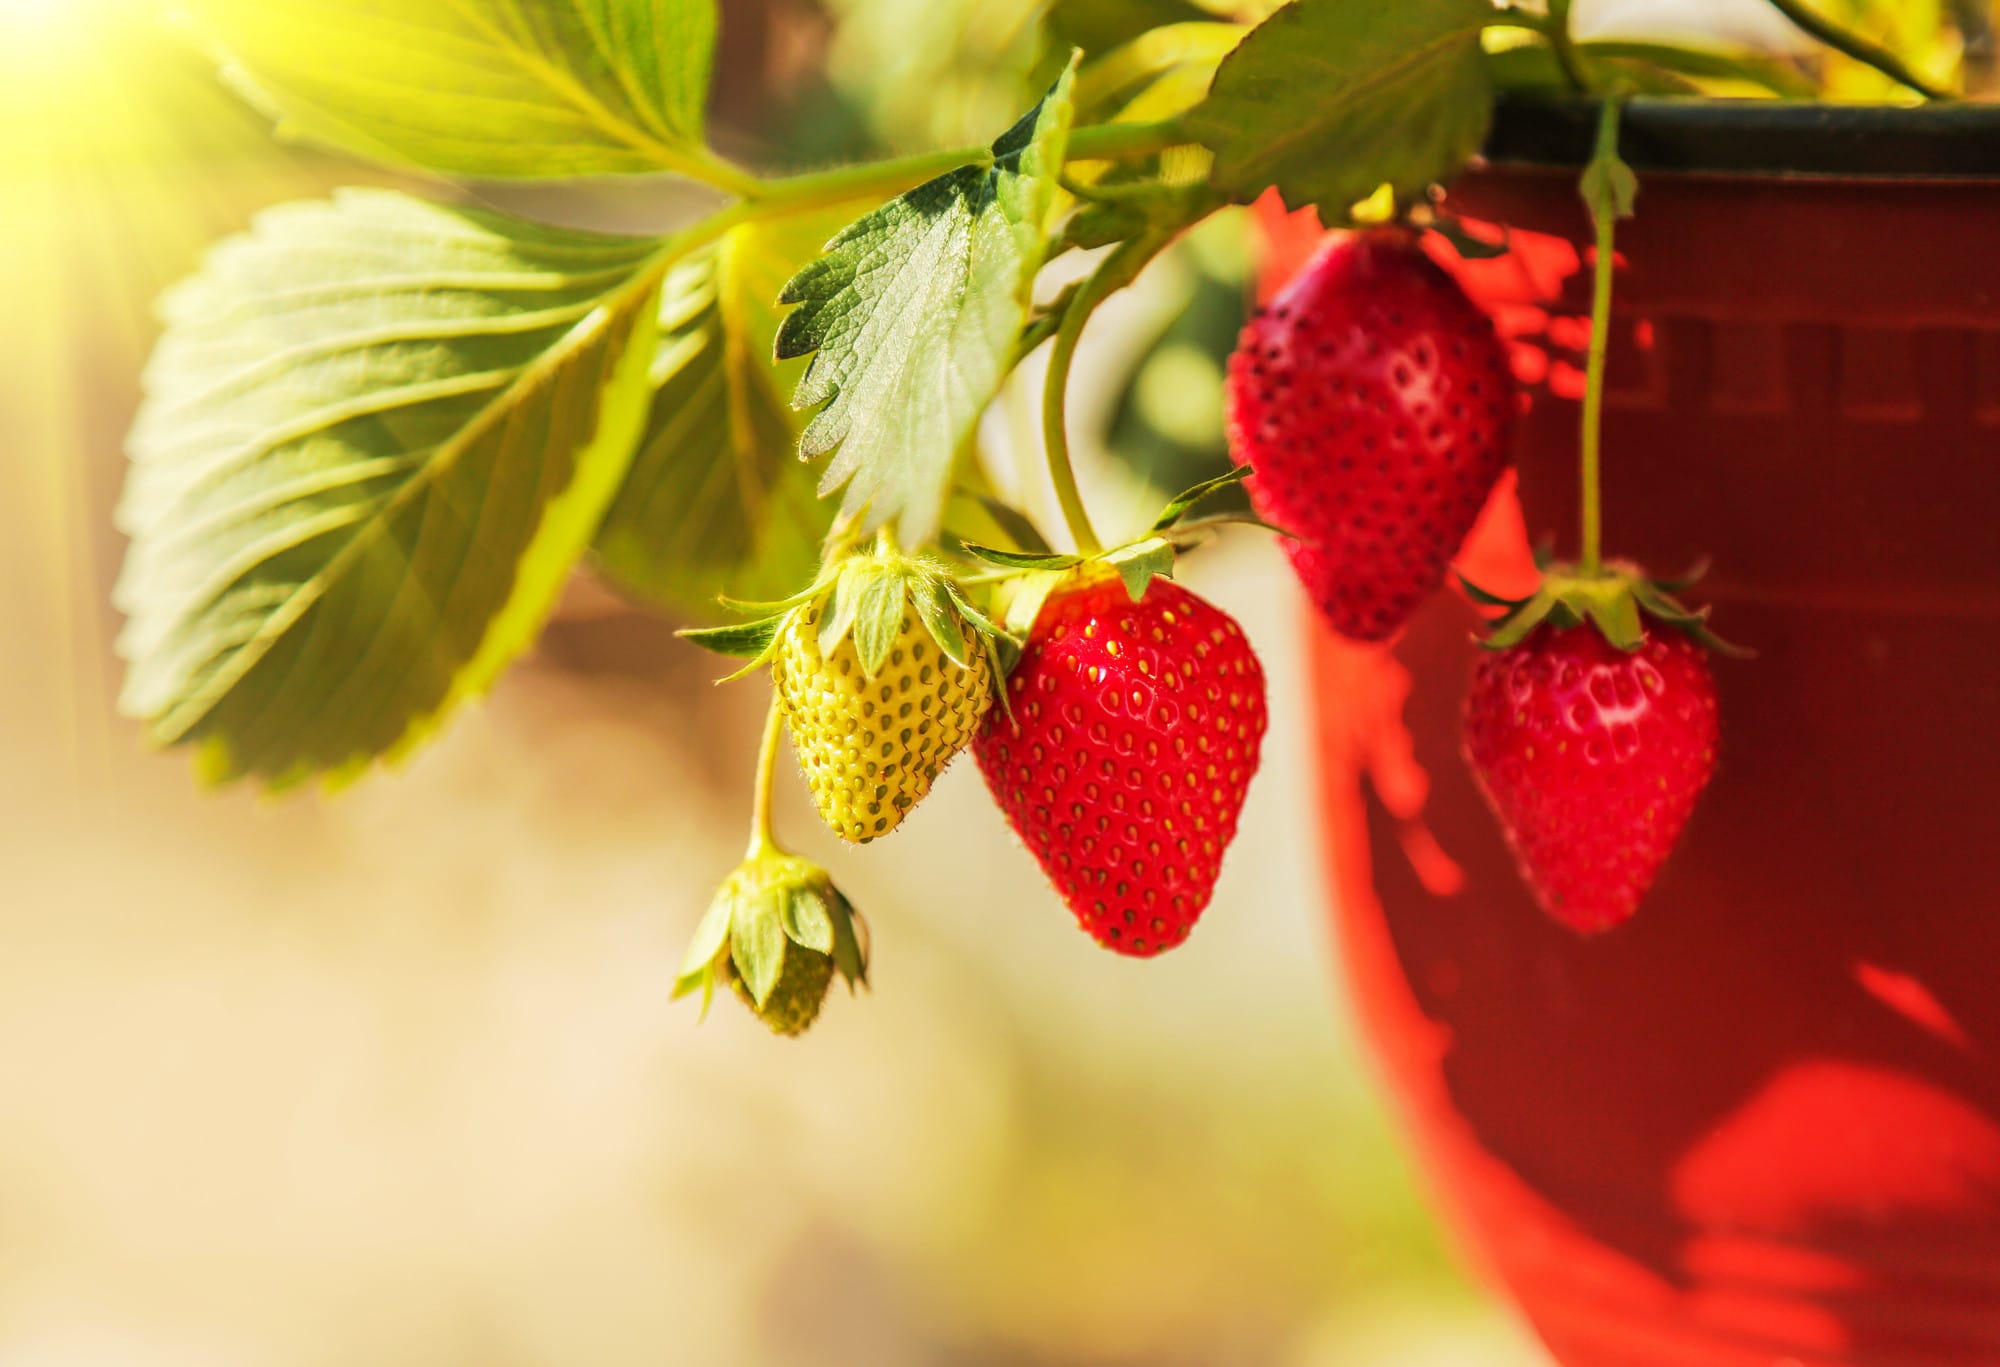 How To Grow Strawberries In Pots: 7 Tips For Juicy Fruits